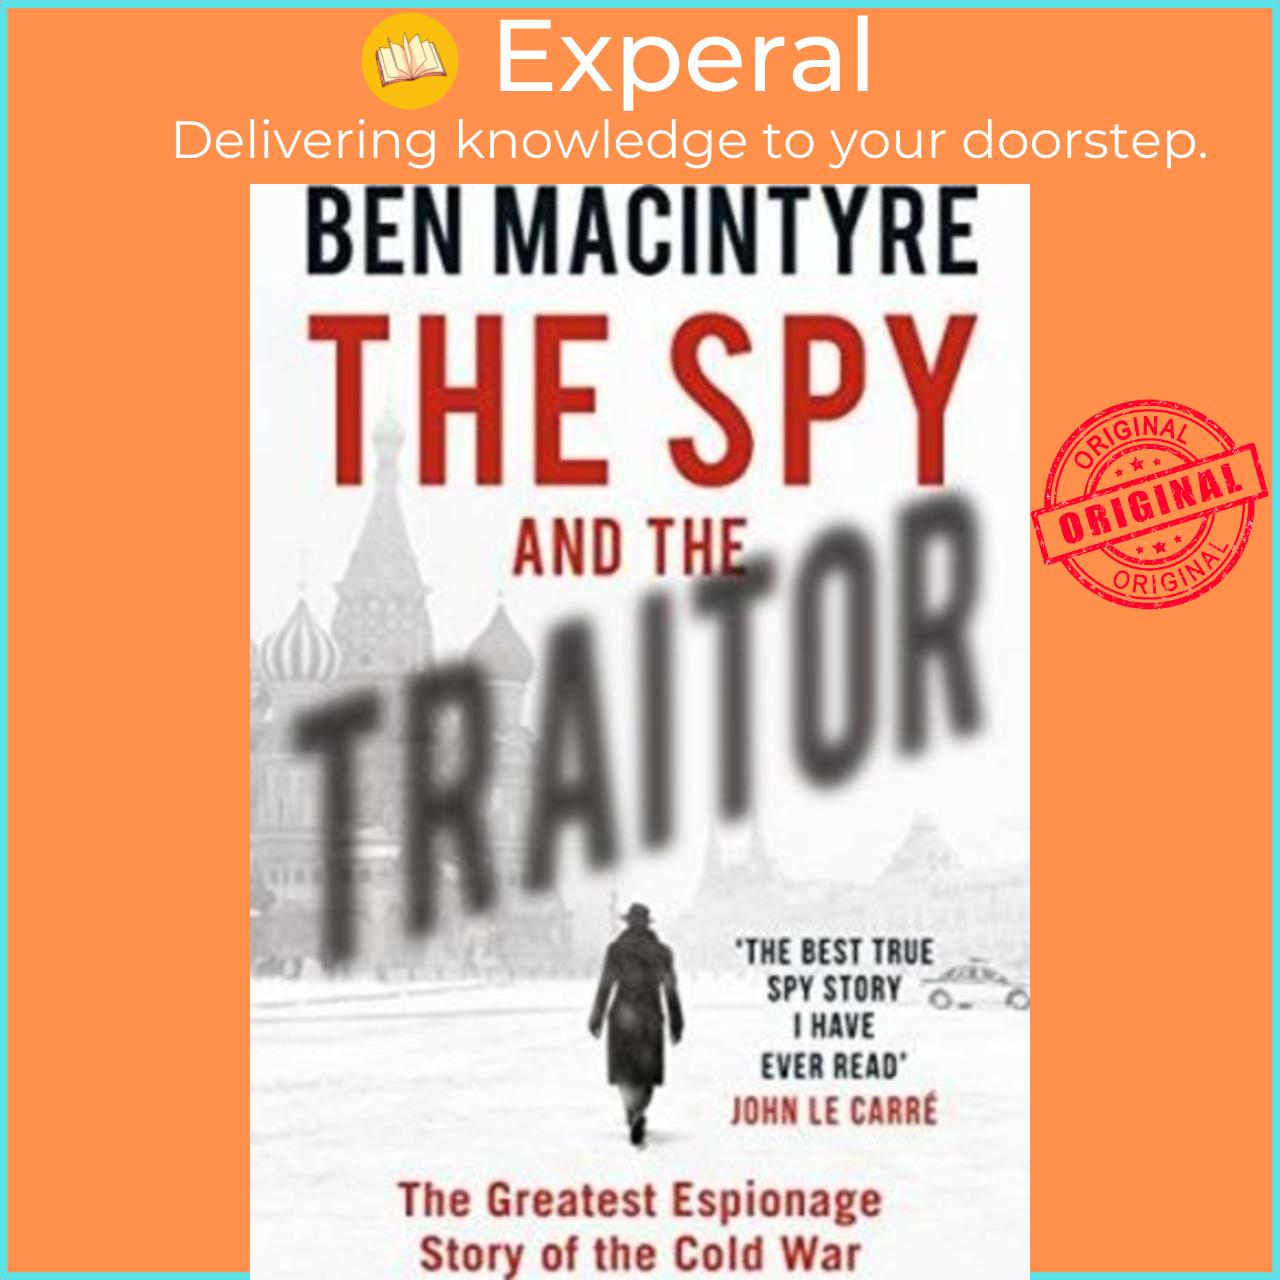 Sách - The Spy and the Traitor : The Greatest Espionage Story of the Cold War by Ben Macintyre (UK edition, paperback)